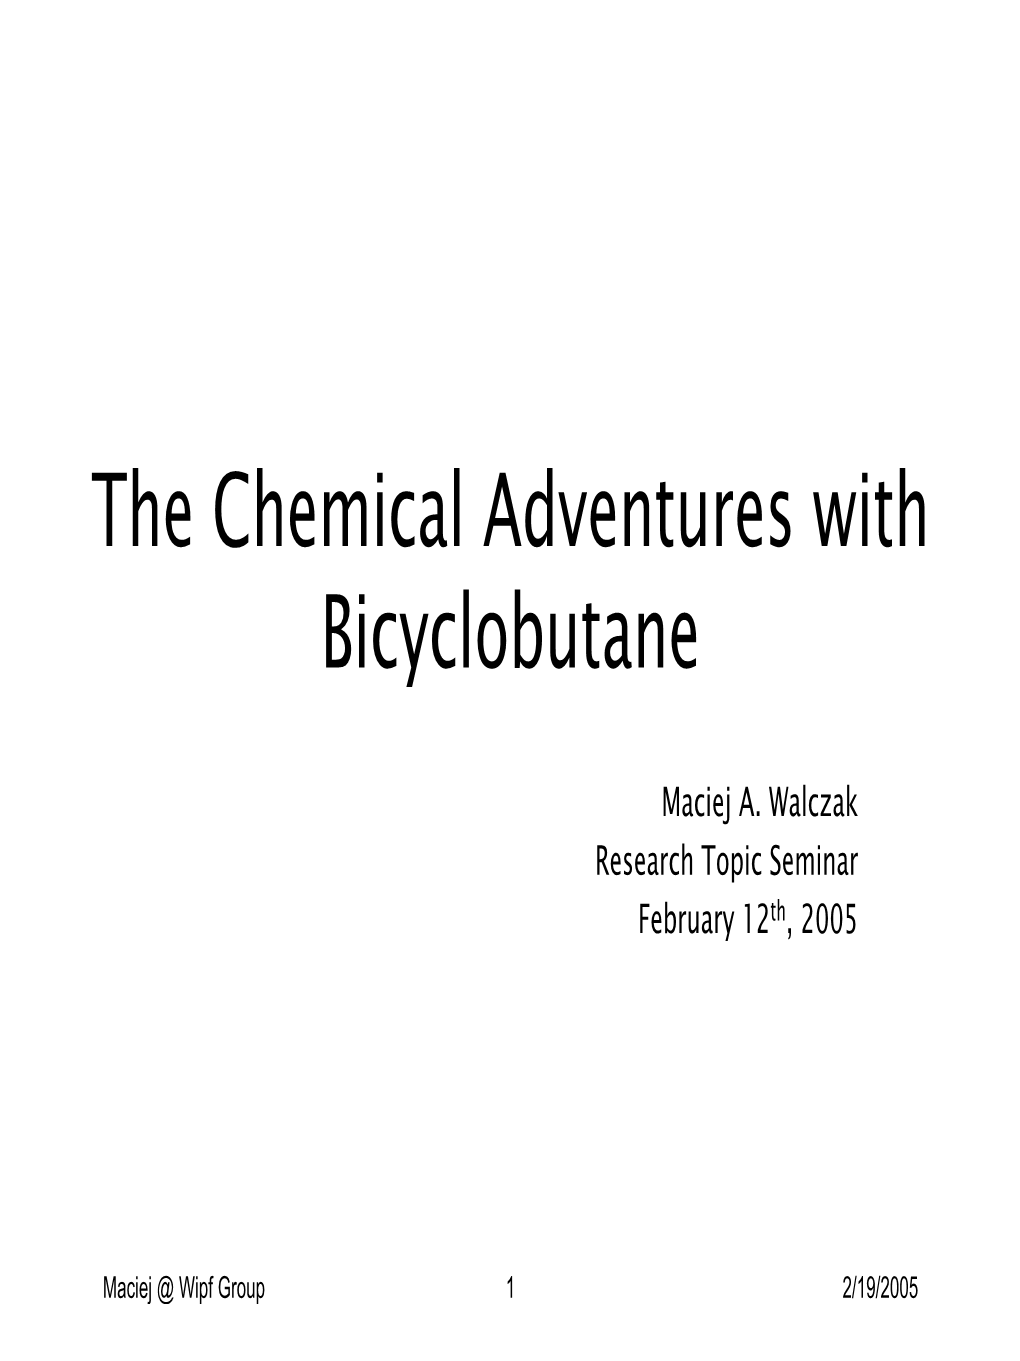 The Chemical Adventures with Bicyclobutane